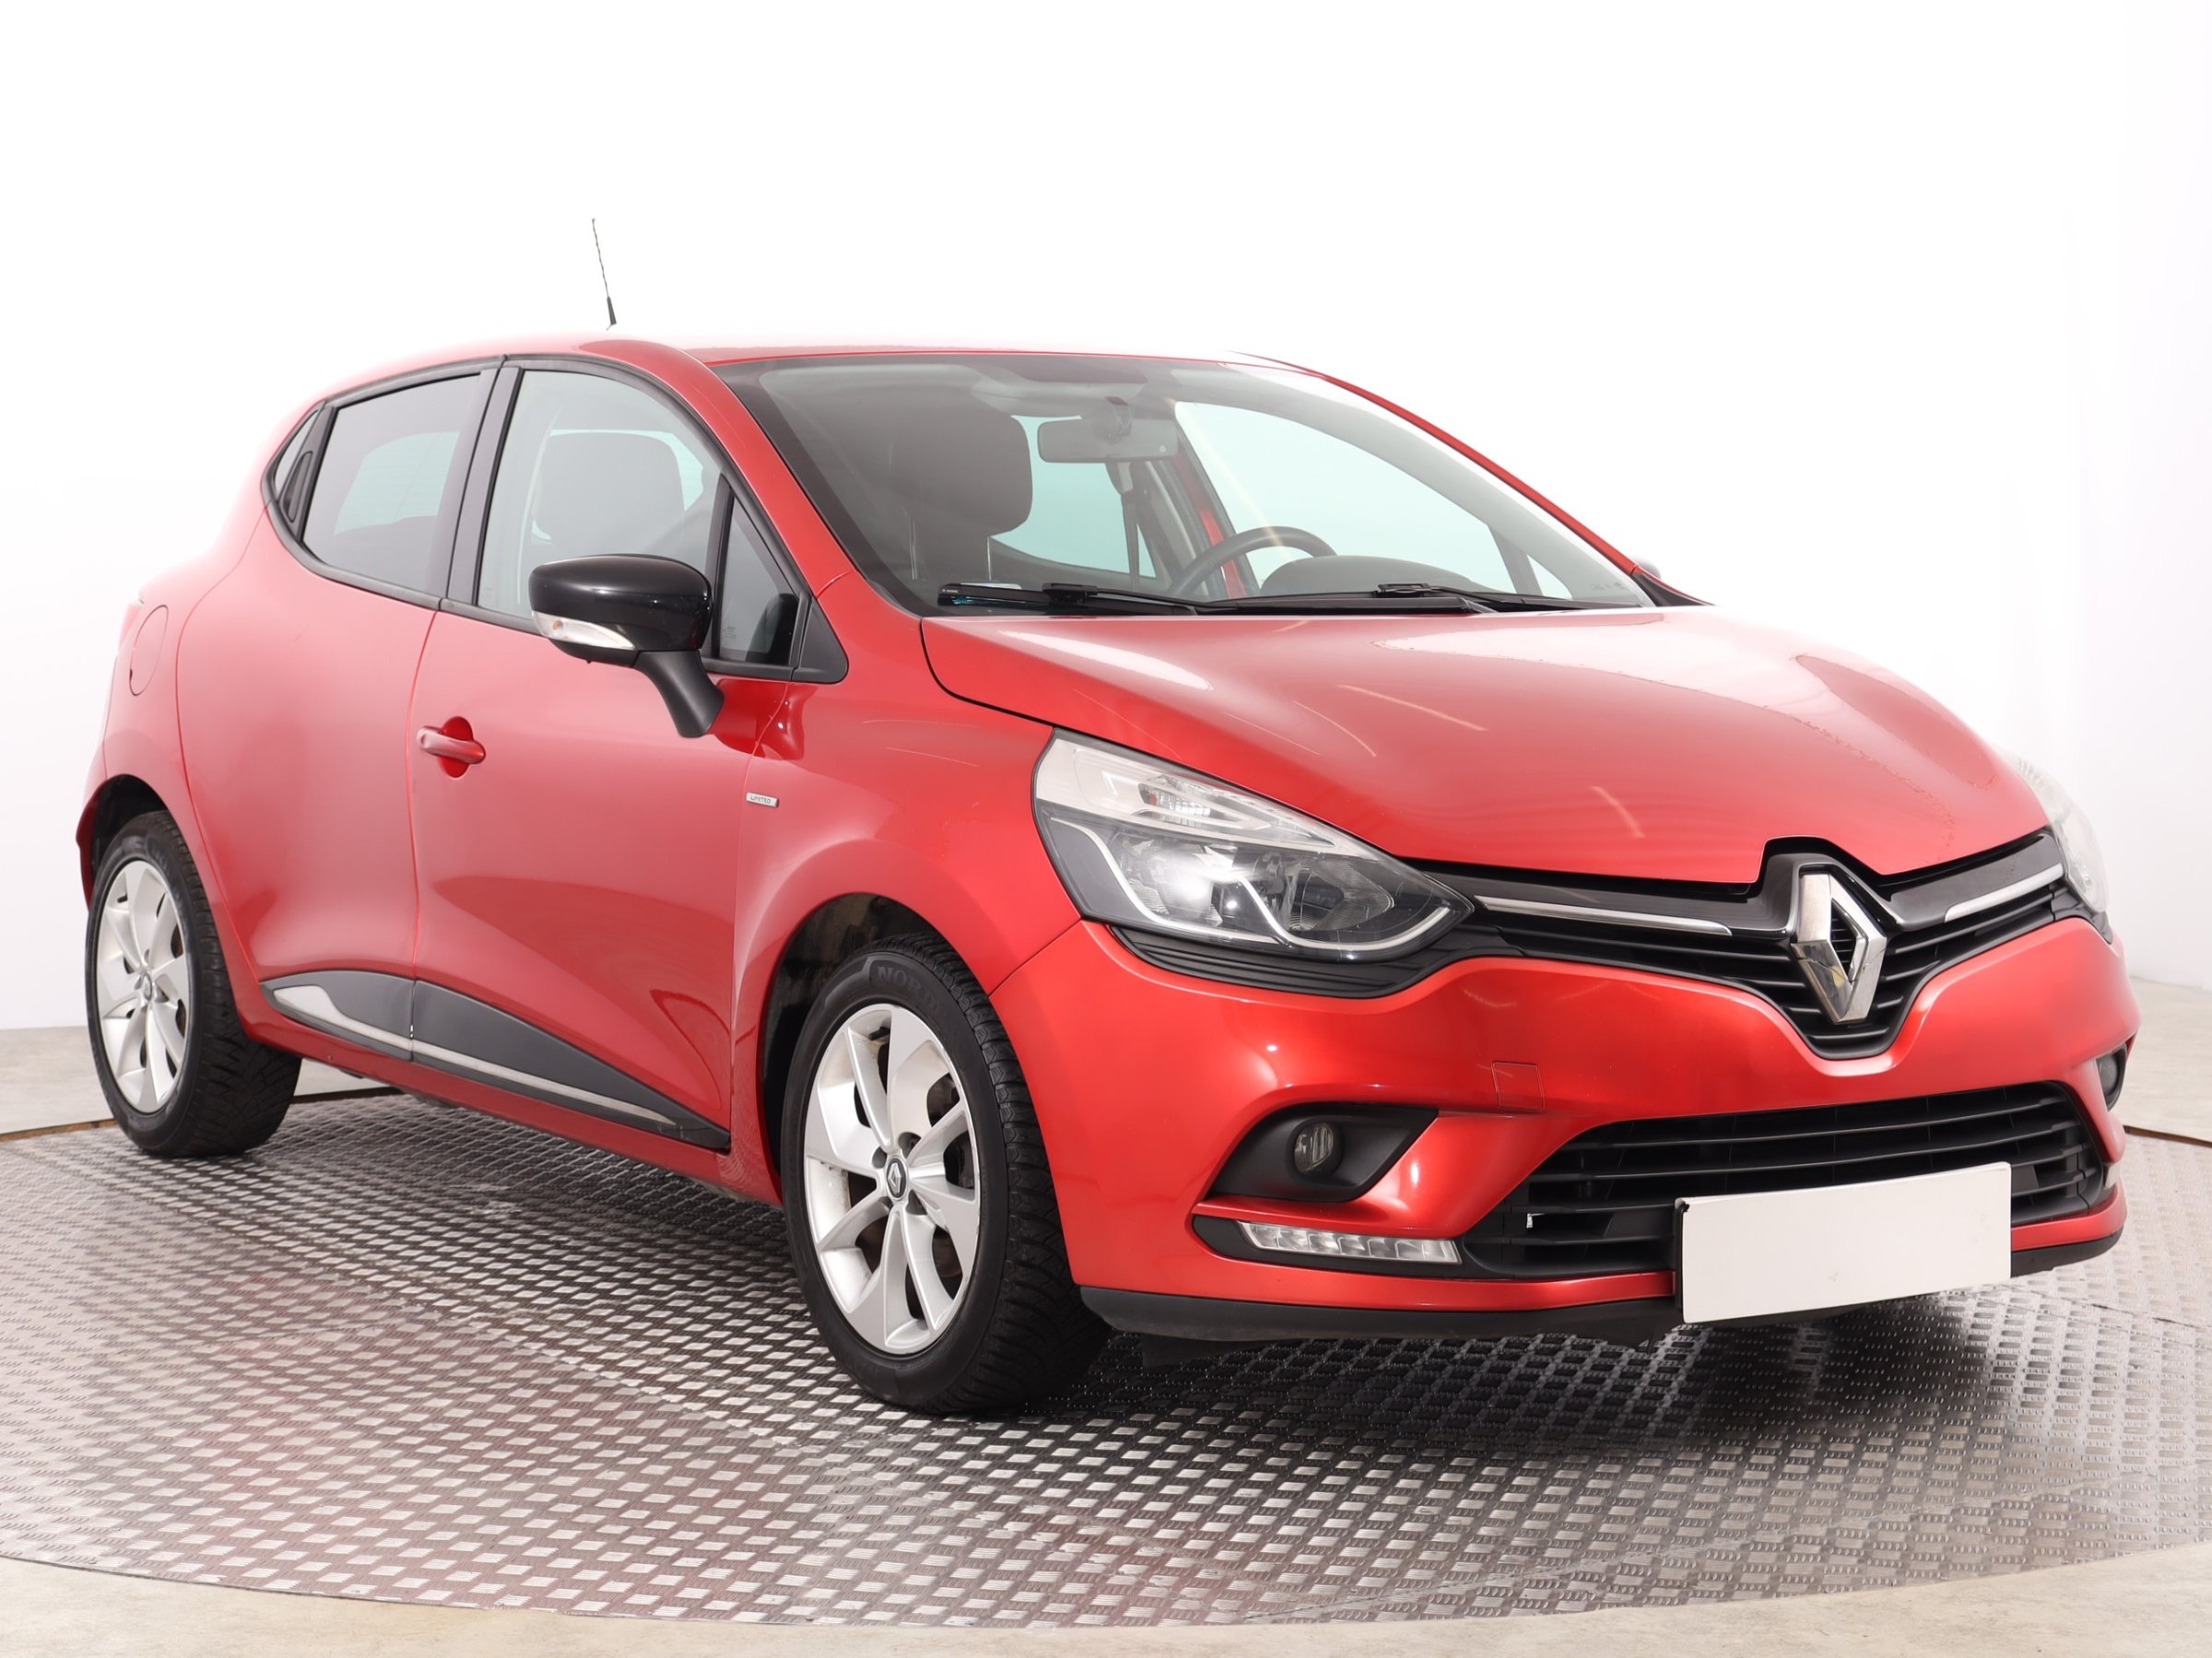 Renault Clio 1.2 TCe Hatchback 2017 - 1